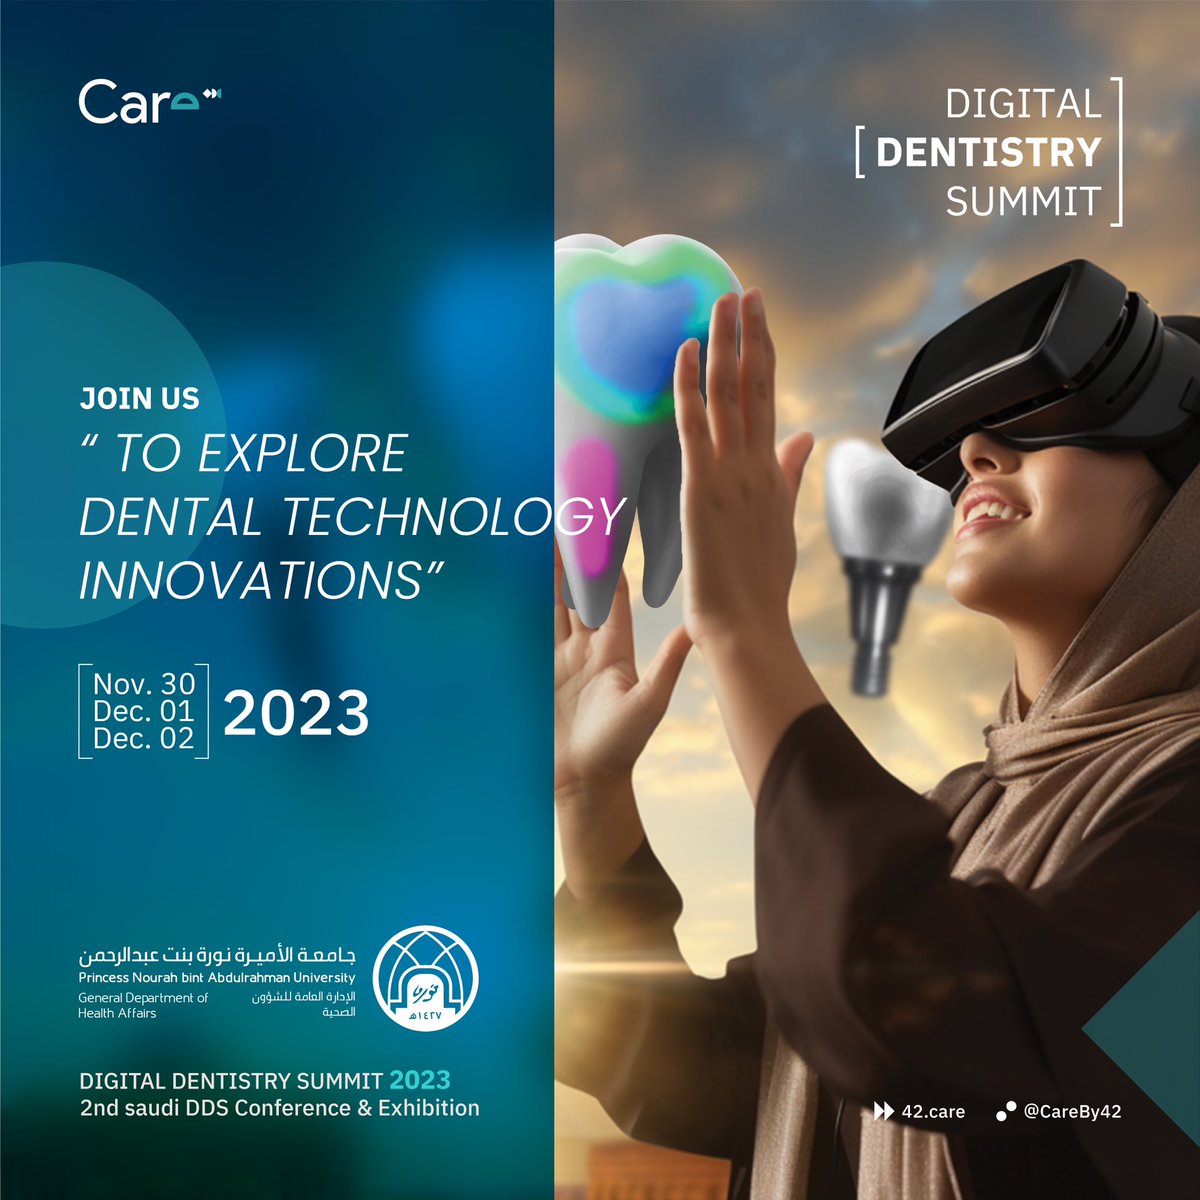 Dive into the future of dental tech with us at the Digital Dentistry Summit!🌐
#CareBy42 #DDS2023 #DigitalDentistrySummit #DentalInnovation